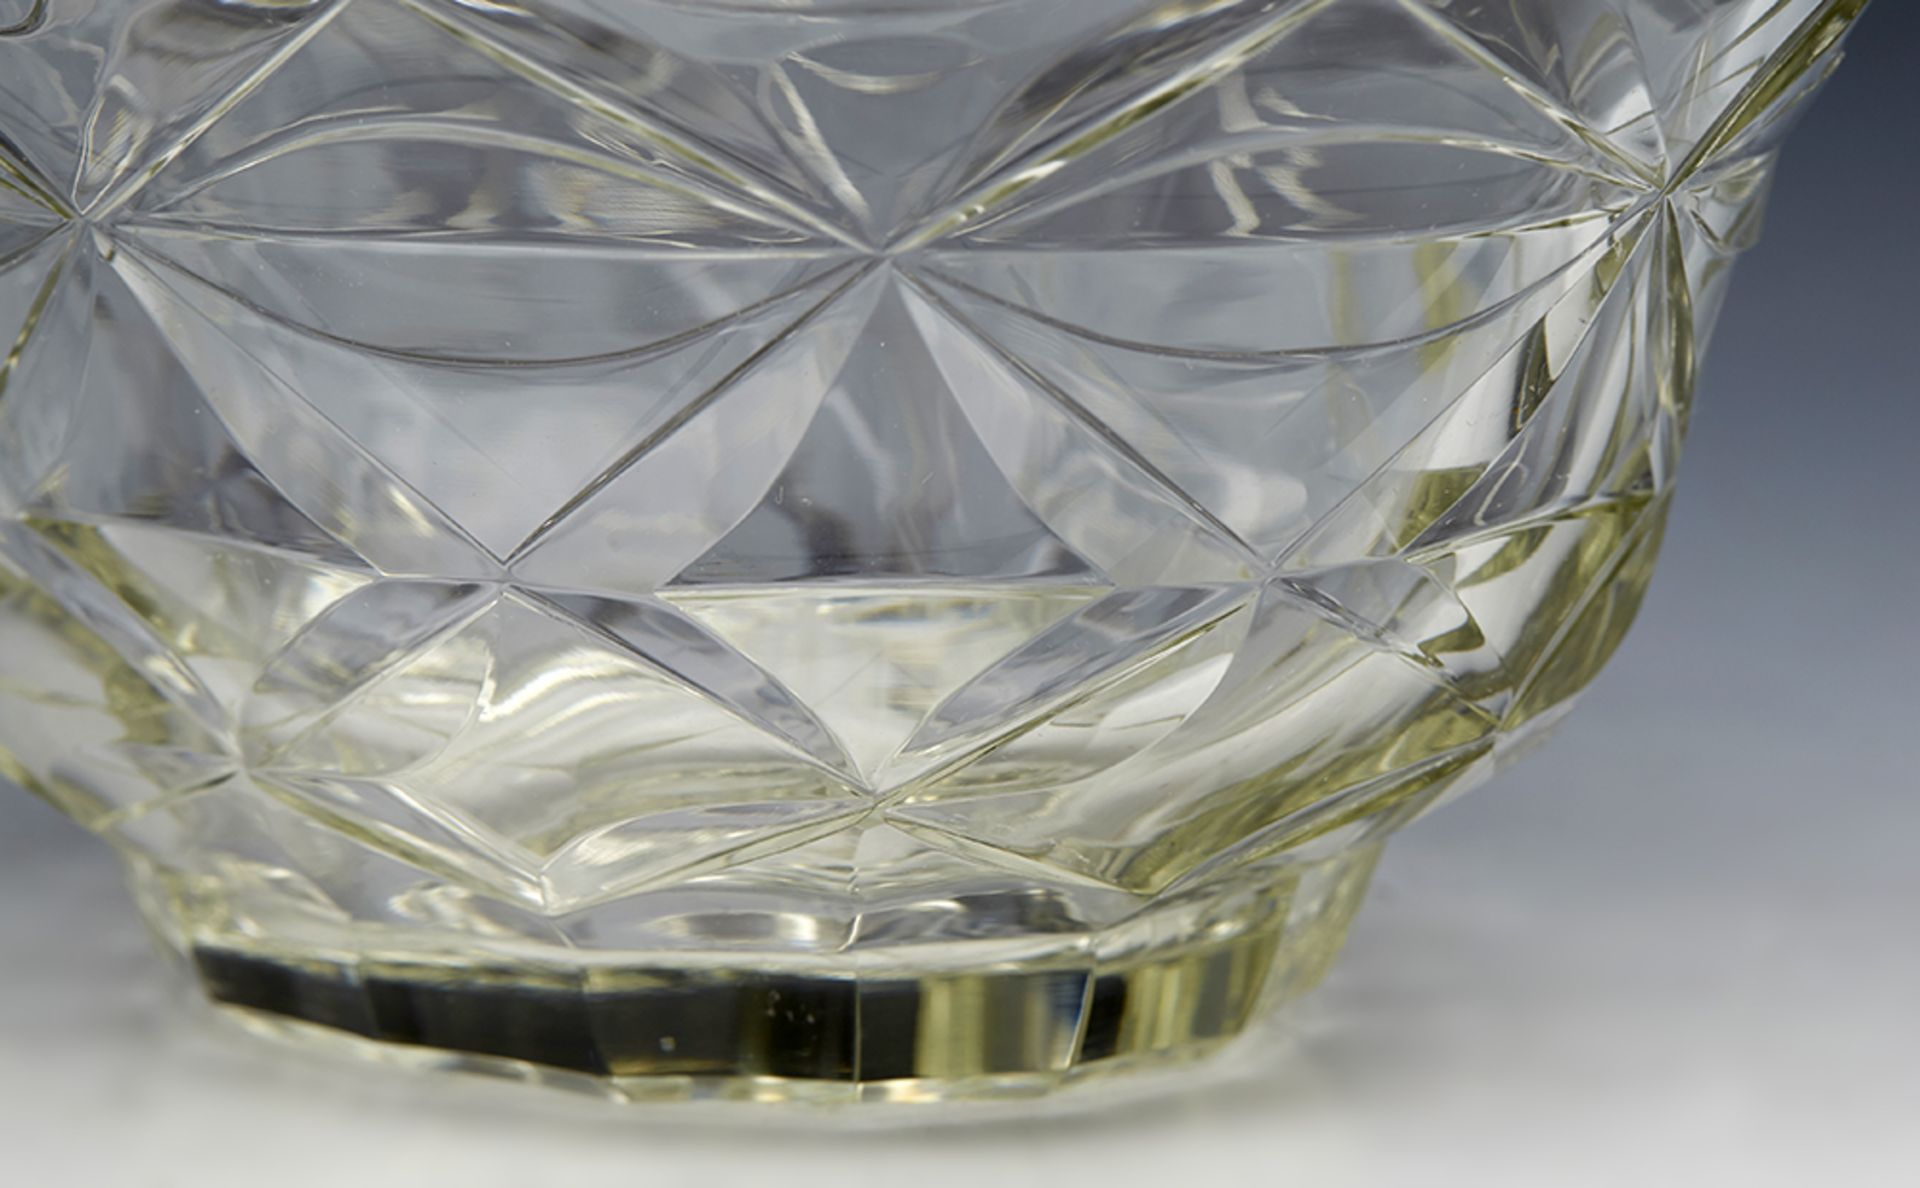 ANTIQUE CUT GLASS LIDDED BUTTER DISH AND STAND EARLY 19TH C.   DIMENSIONS   Height 19cm, Length 25, - Image 6 of 15